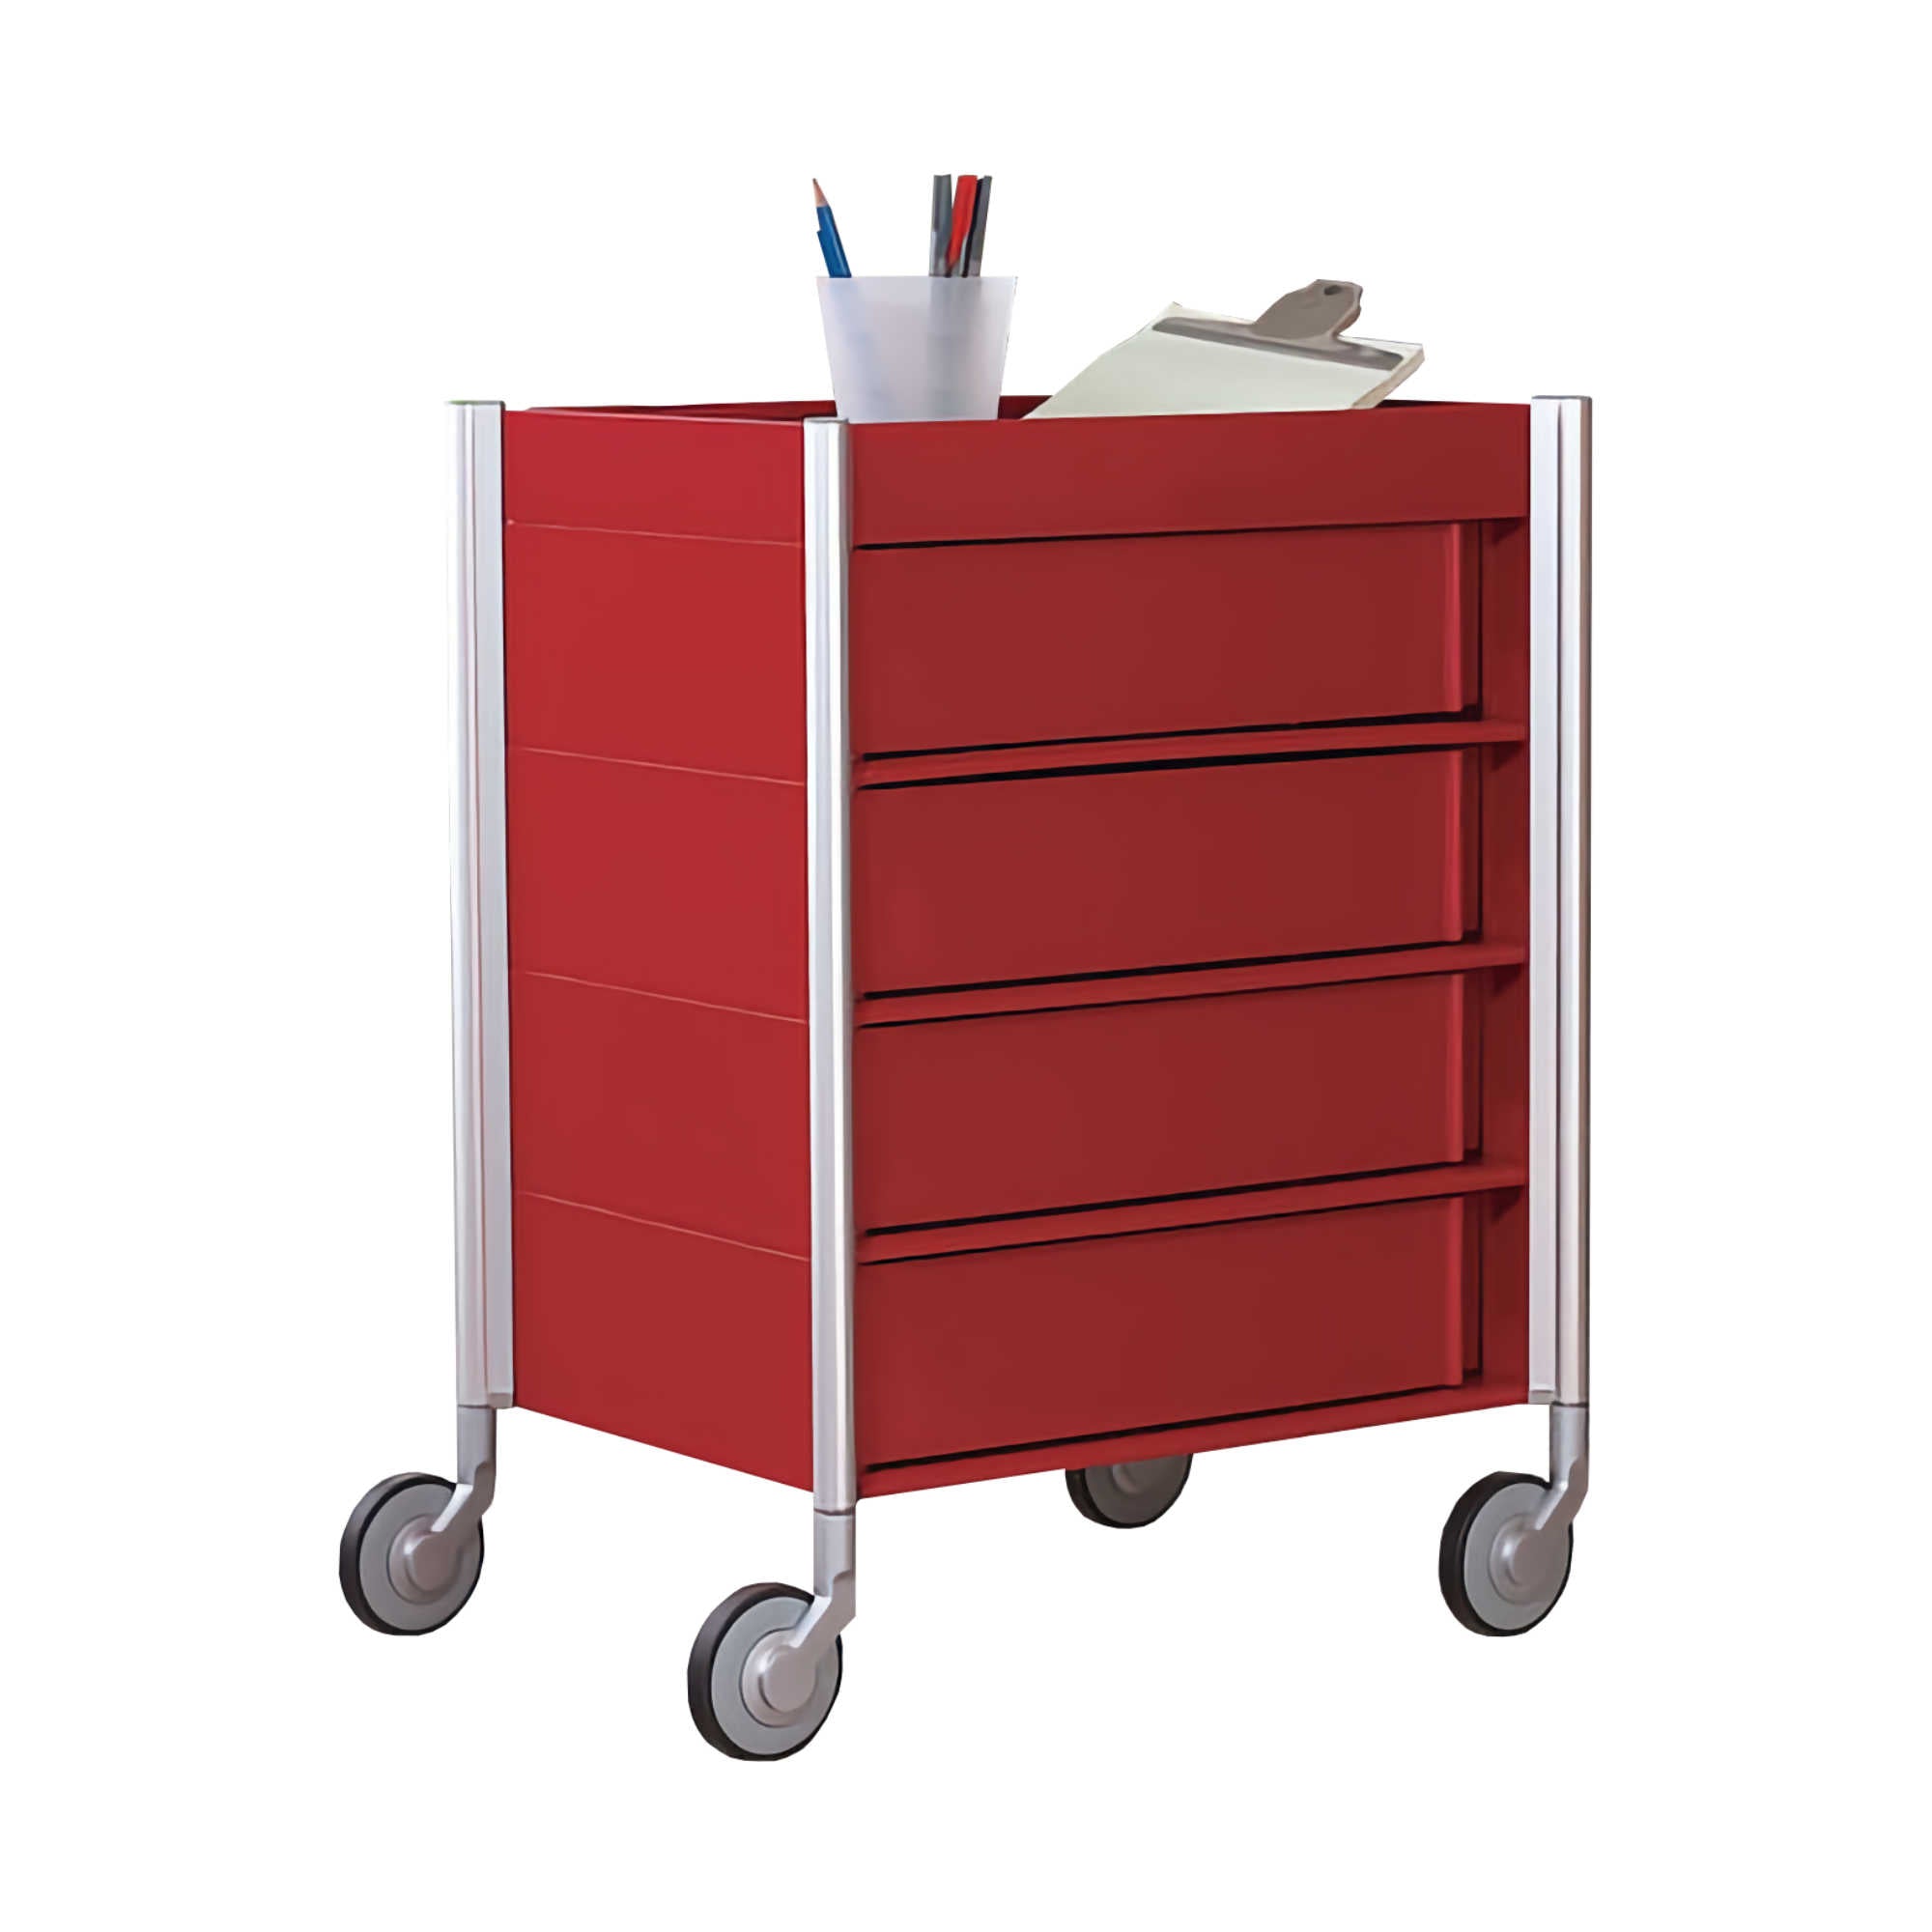 Studio Domo Ally Mid Trolley w. 4 Drawers, red